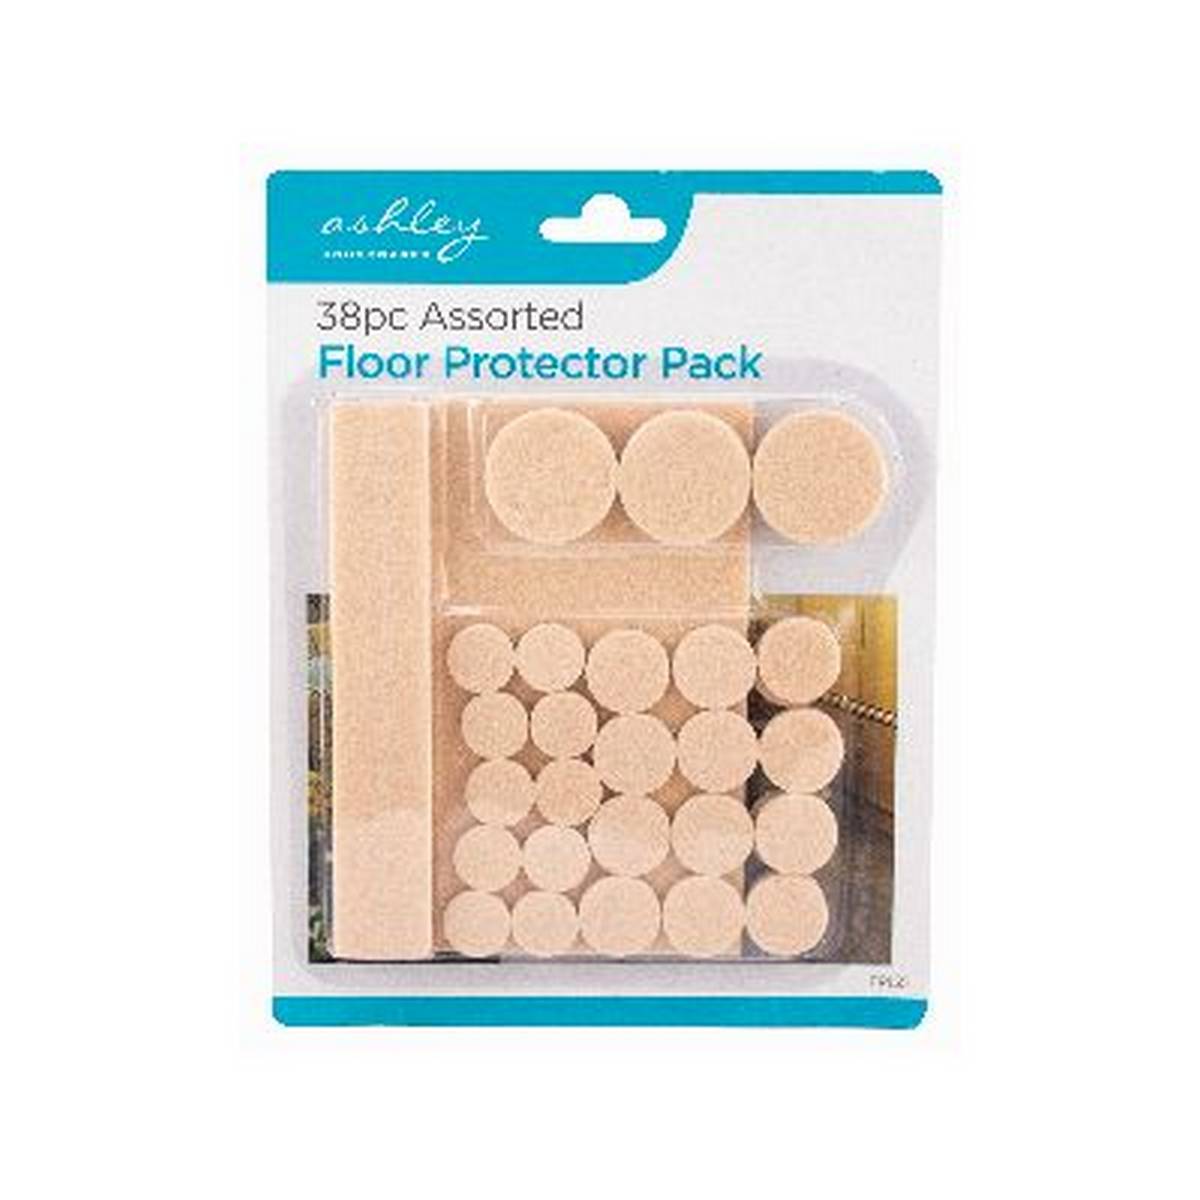 ASHLEY 38PC FLOOR PROTECTOR PACK BB-FP155